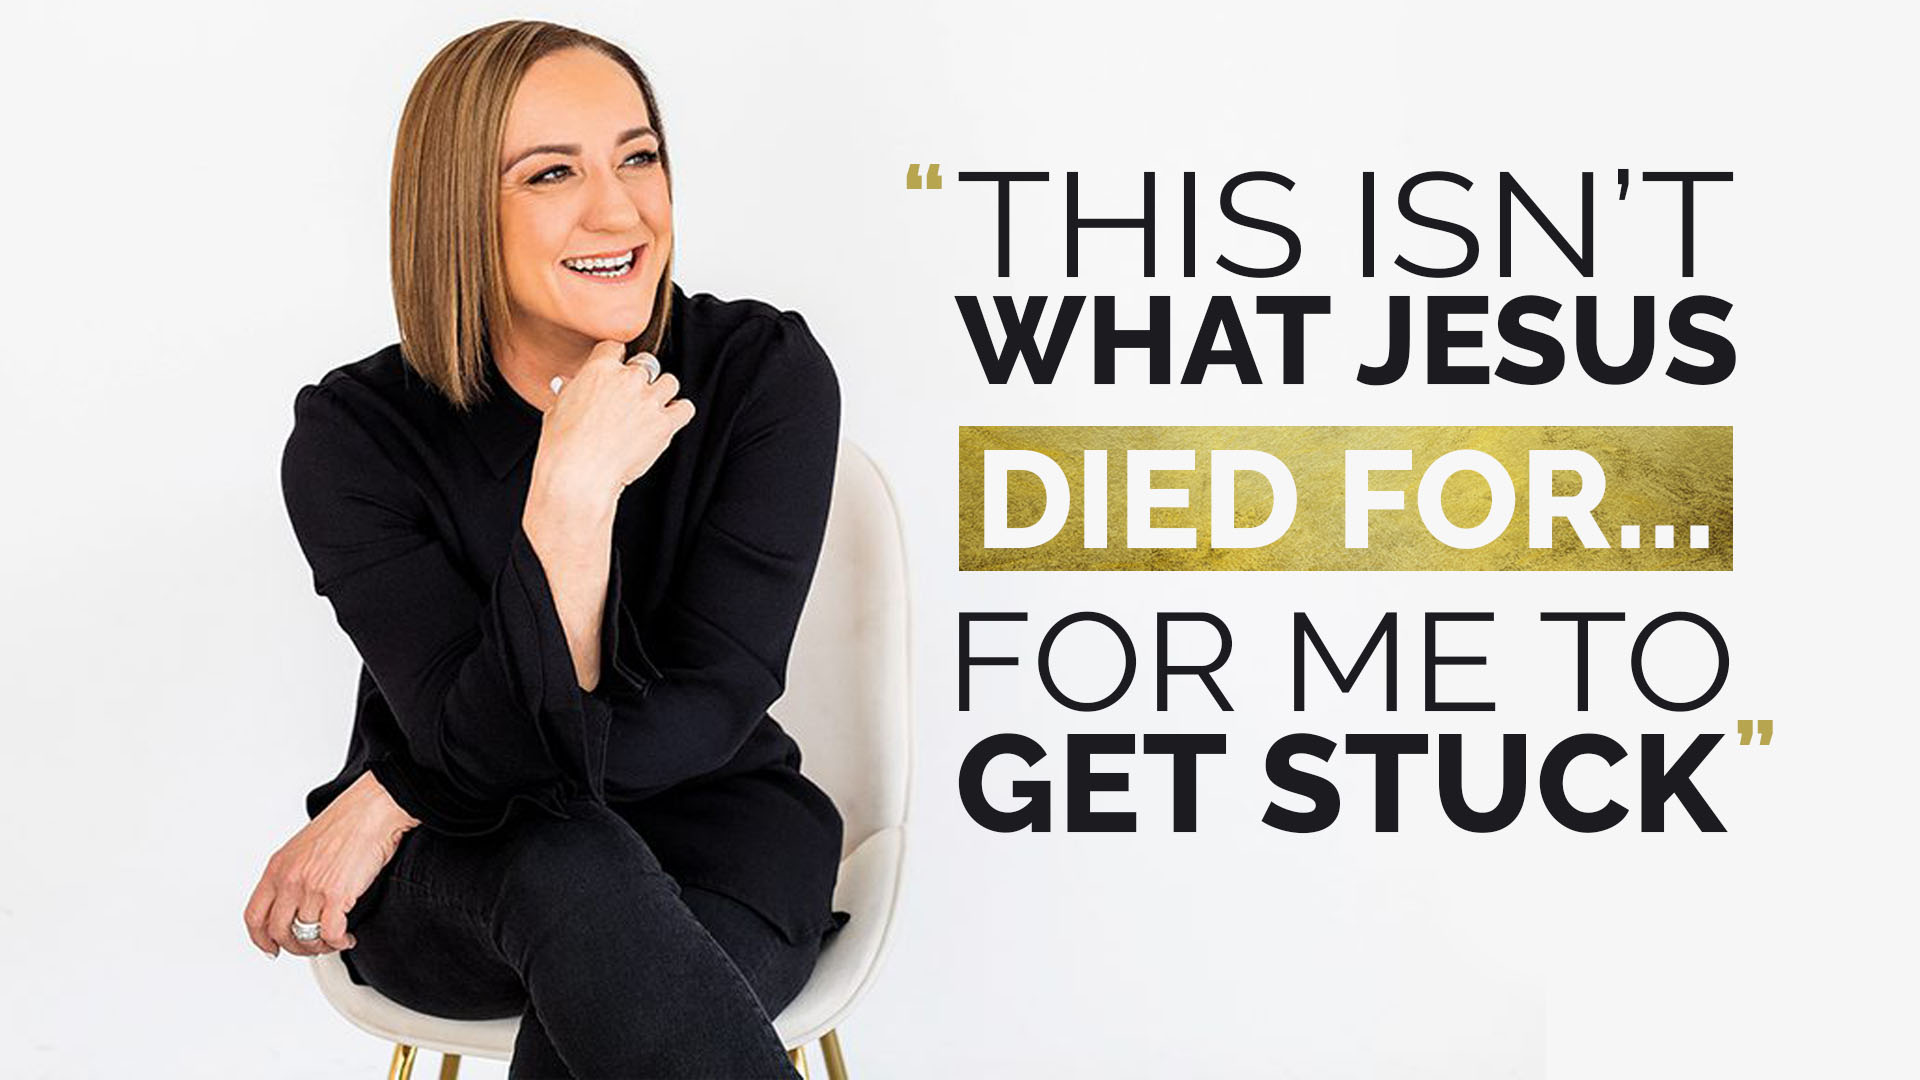 Christine Caine Shares What to Do When You Feel Stuck in Your Faith